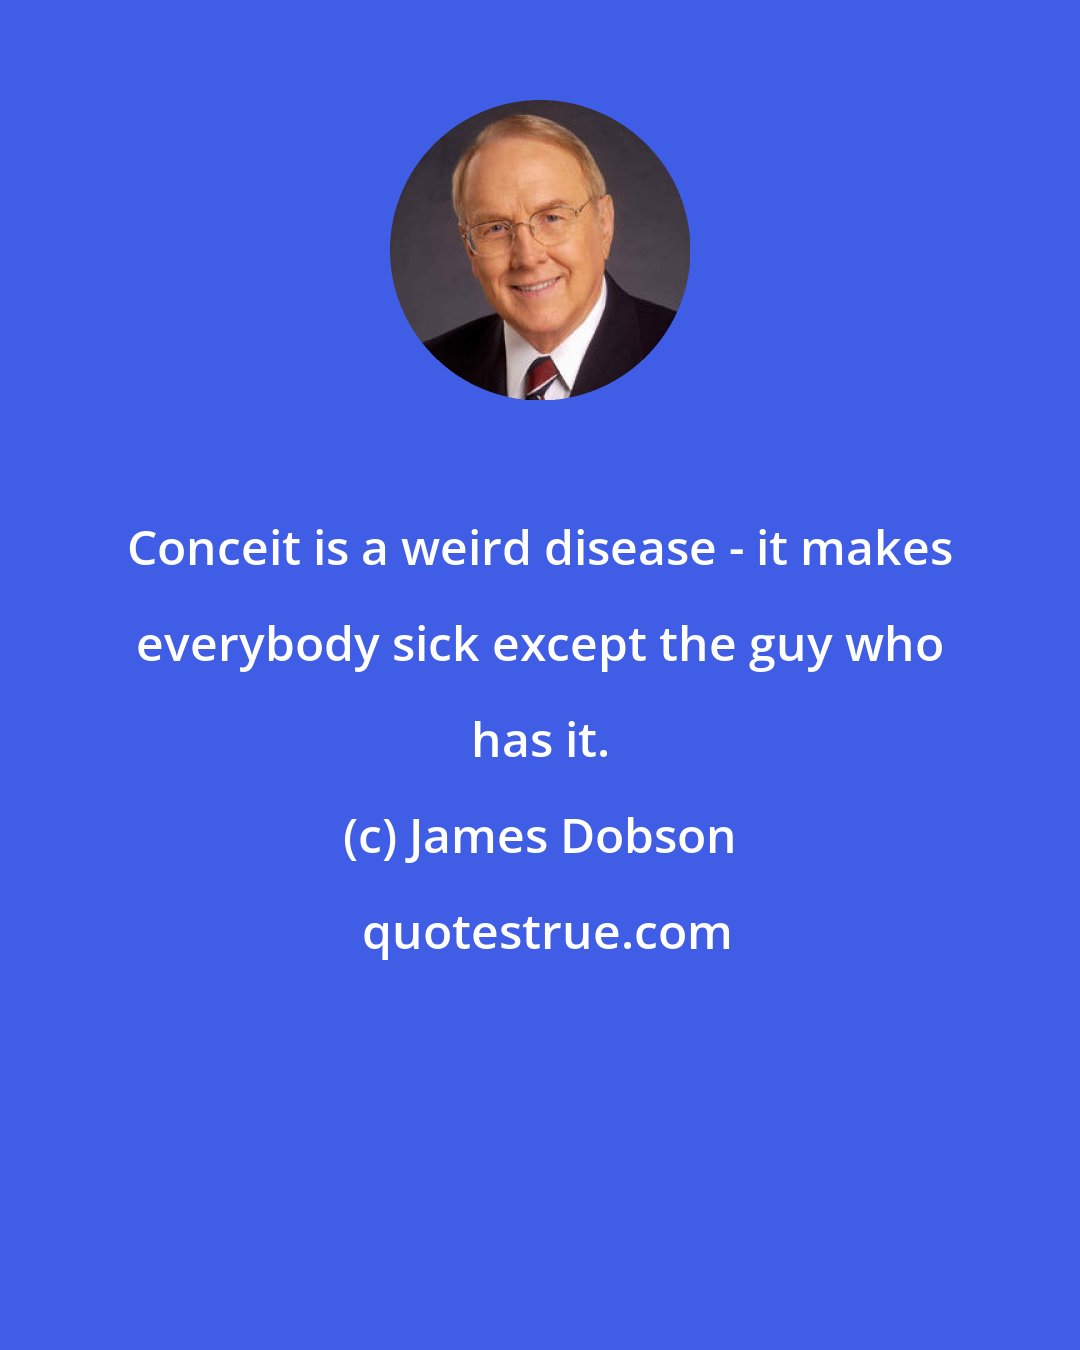 James Dobson: Conceit is a weird disease - it makes everybody sick except the guy who has it.